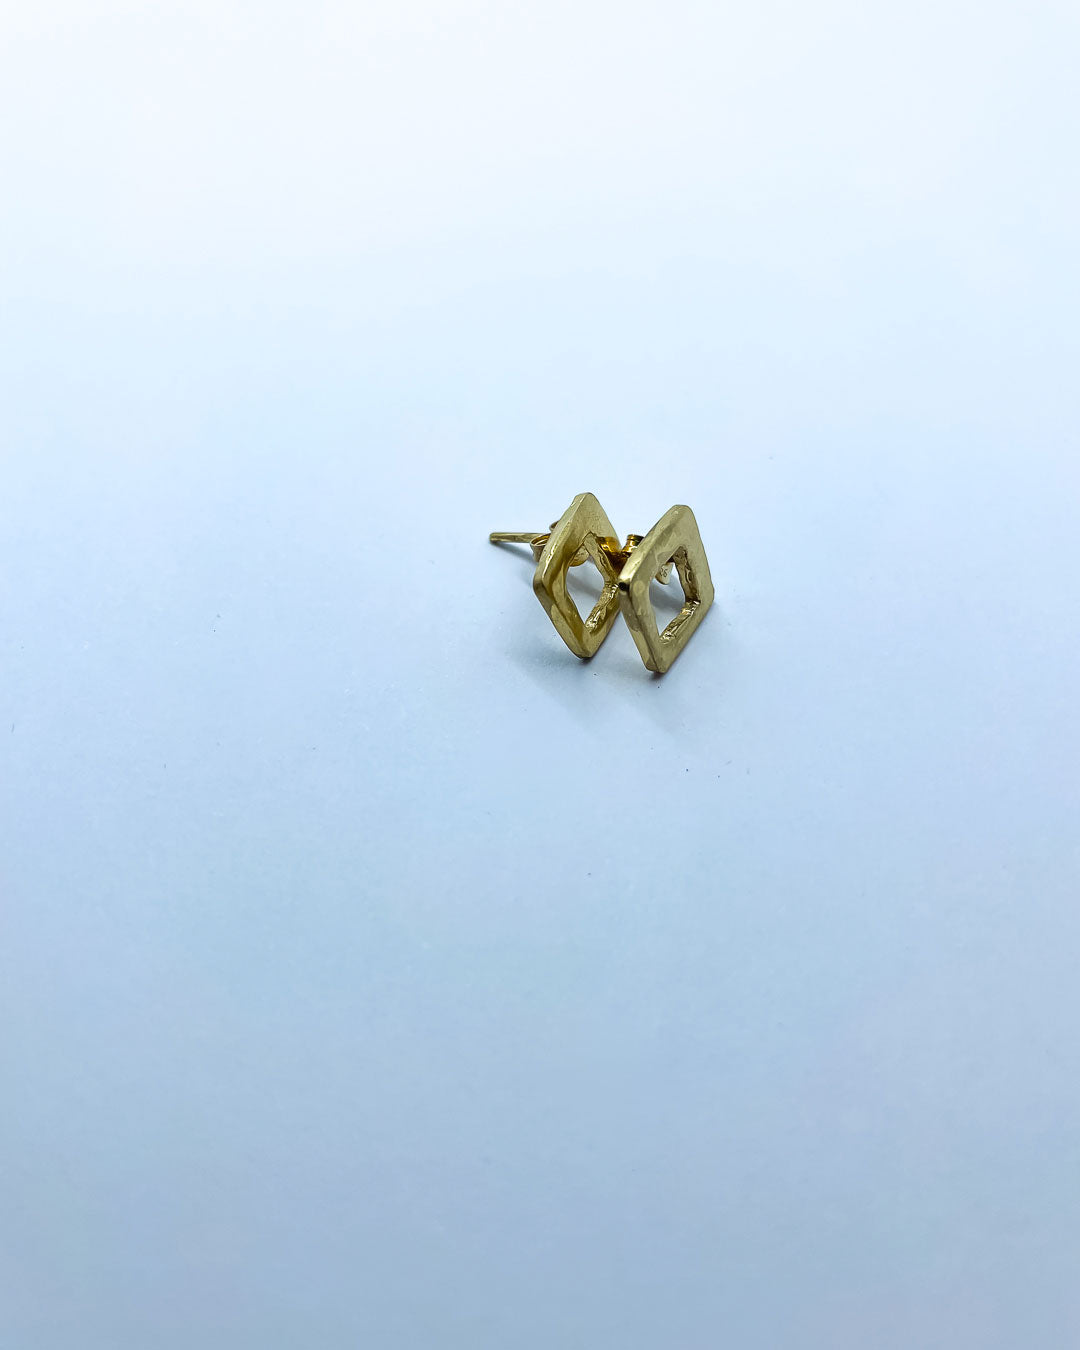 A side profile of a pair of Gold open geometric form pierced earrings inspired by Mid Century Geometric Patterns. Deliberately left to show makers marks.